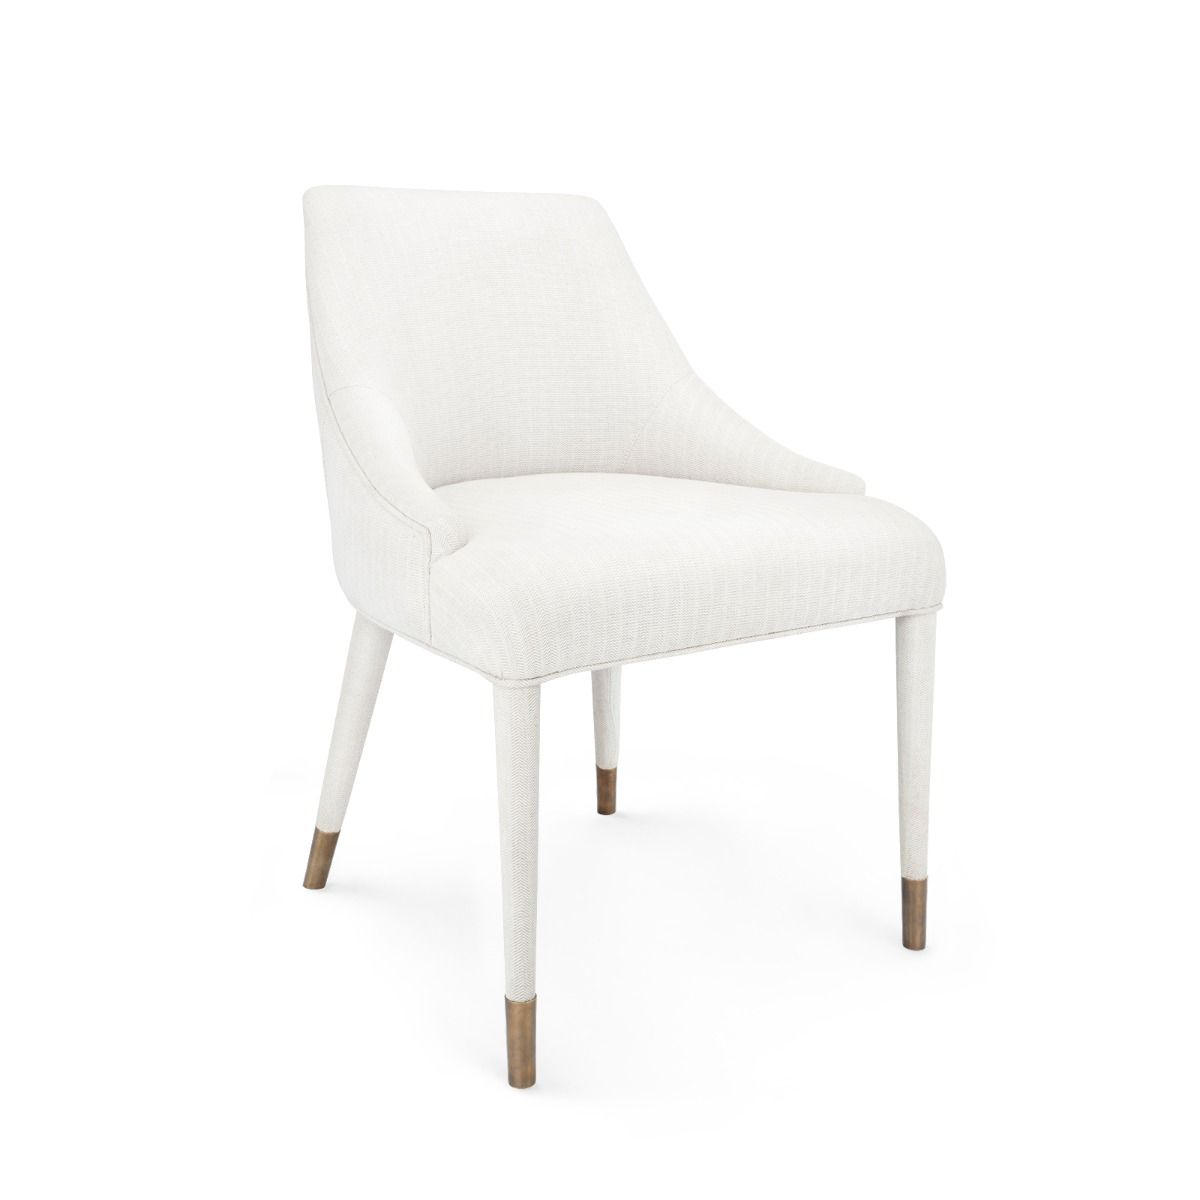 Odette Armchair, Natural Dining Chair Bungalow 5     Four Hands, Burke Decor, Mid Century Modern Furniture, Old Bones Furniture Company, Old Bones Co, Modern Mid Century, Designer Furniture, https://www.oldbonesco.com/